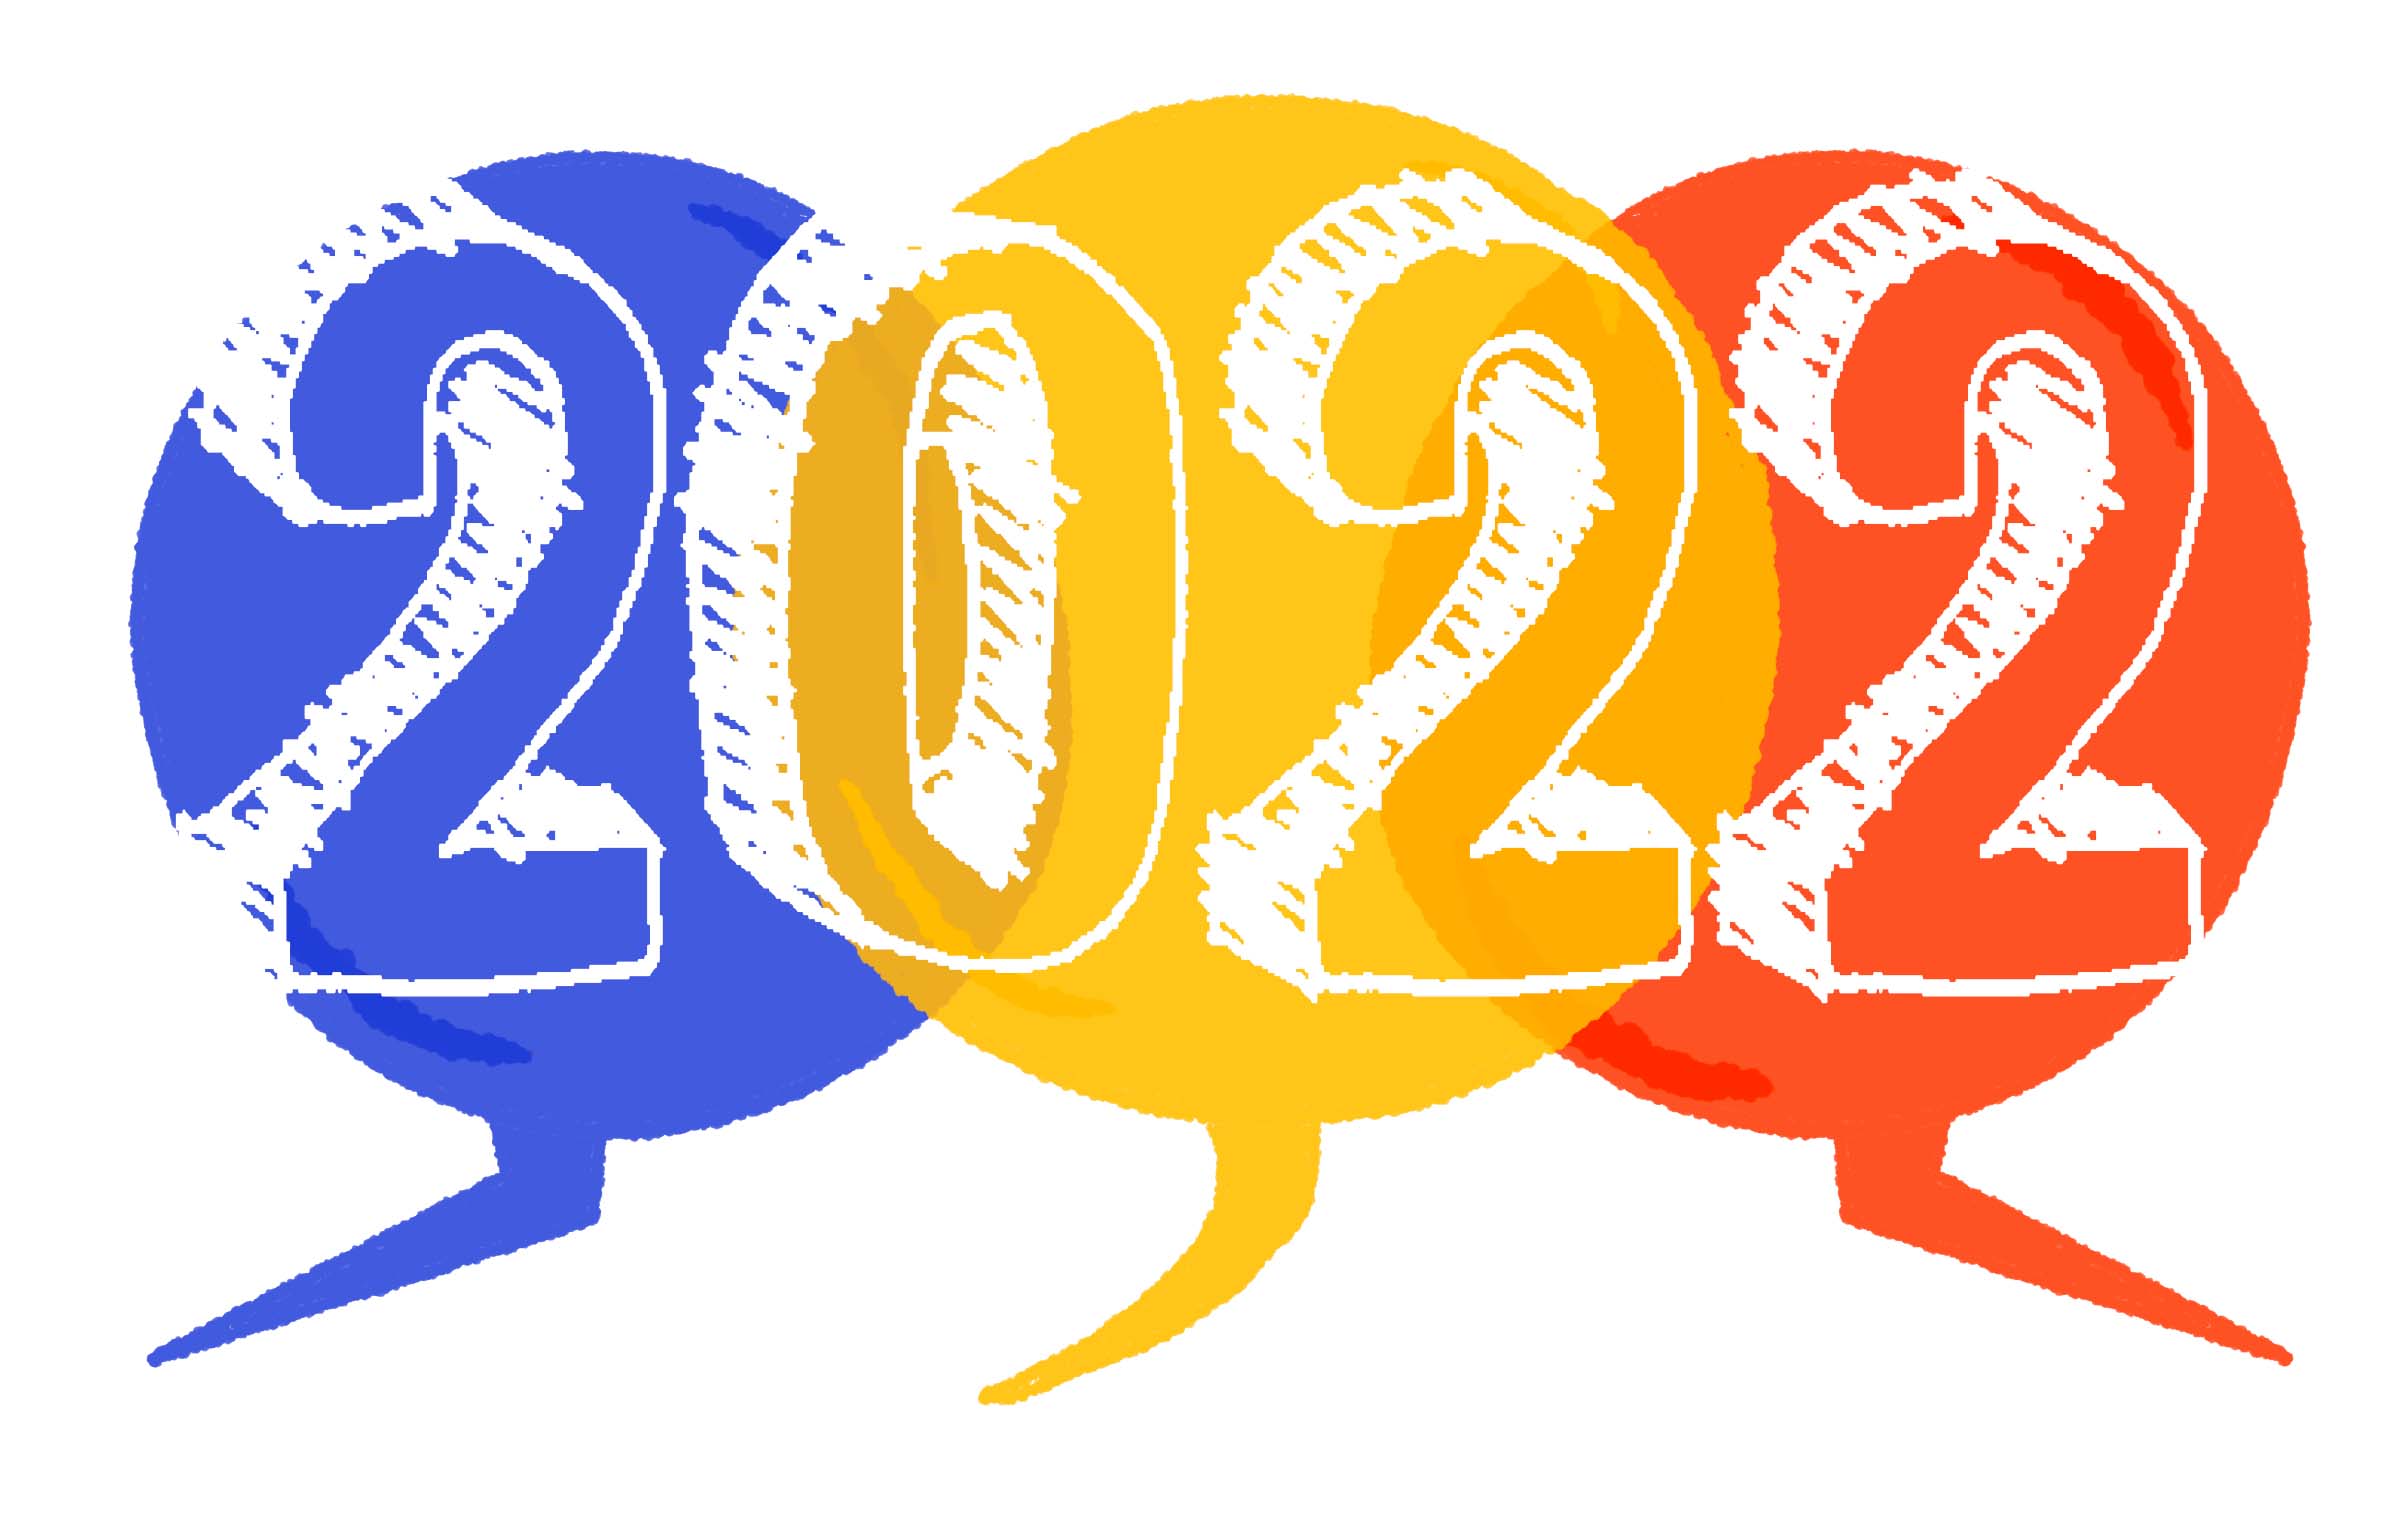 3 Conversations to Follow in 2022